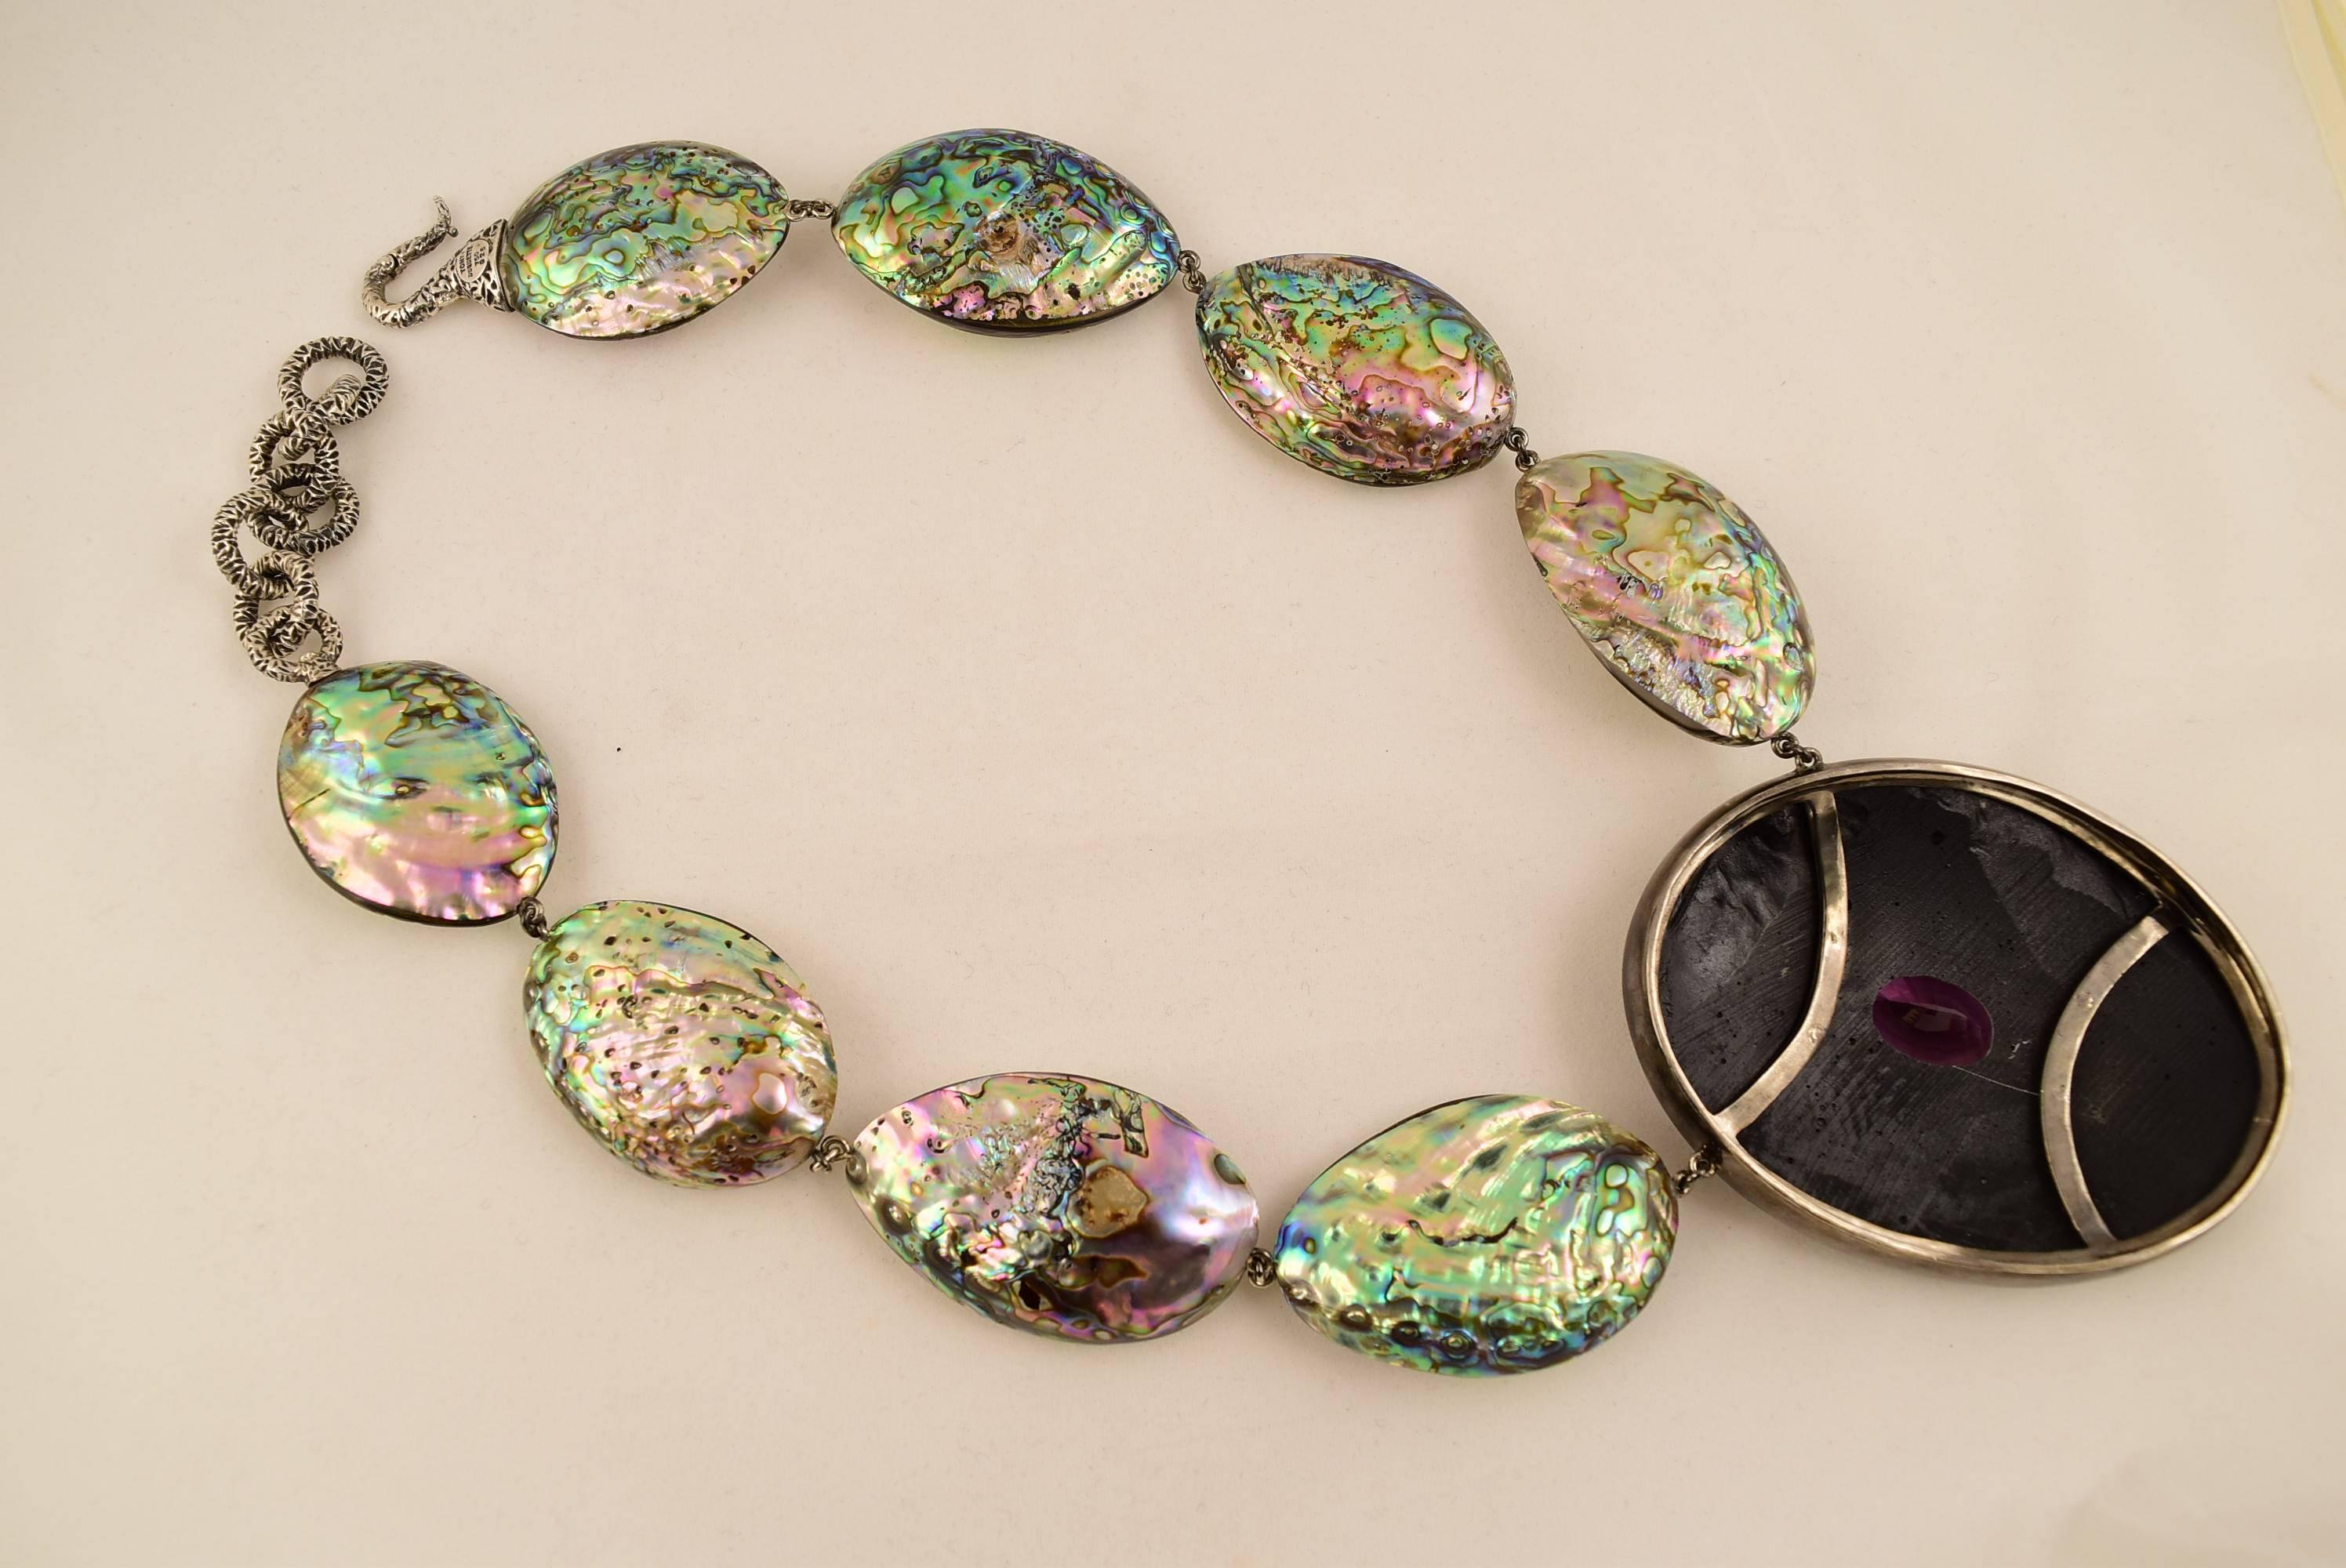 Sensational Abalone, Amethyst Necklace; hand crafted in Silver and 18k Gold by Tony Duquette, Designer Extraordinaire! Amethyst (app. 55 ct.) signed: TONY DUQUETTE 18K 925. Outstanding…A Piece of Timeless Beauty! 
